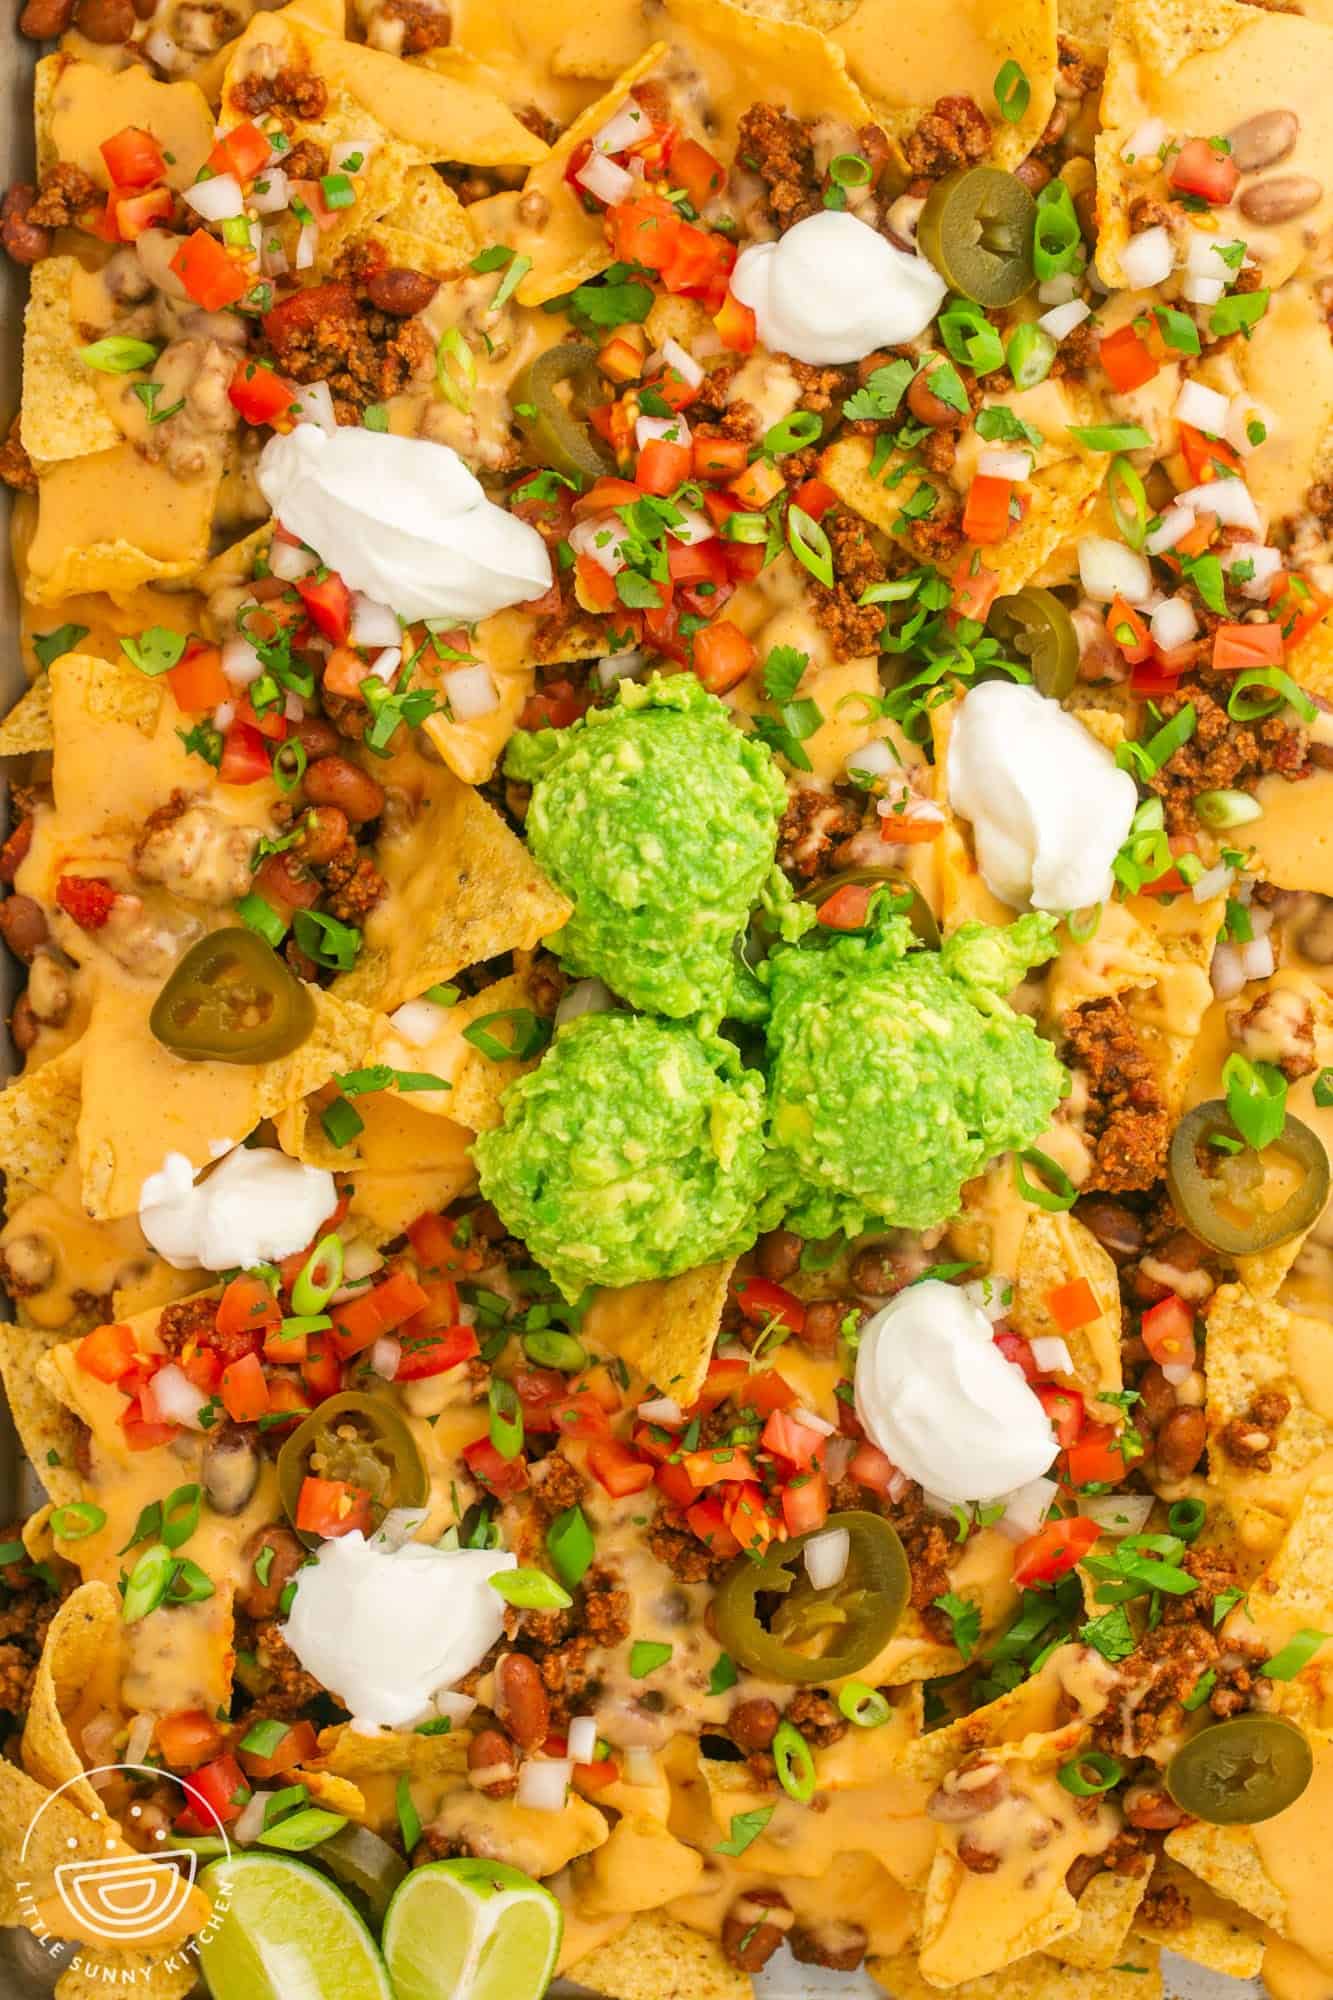 A tray of nachos, loaded with toppings.